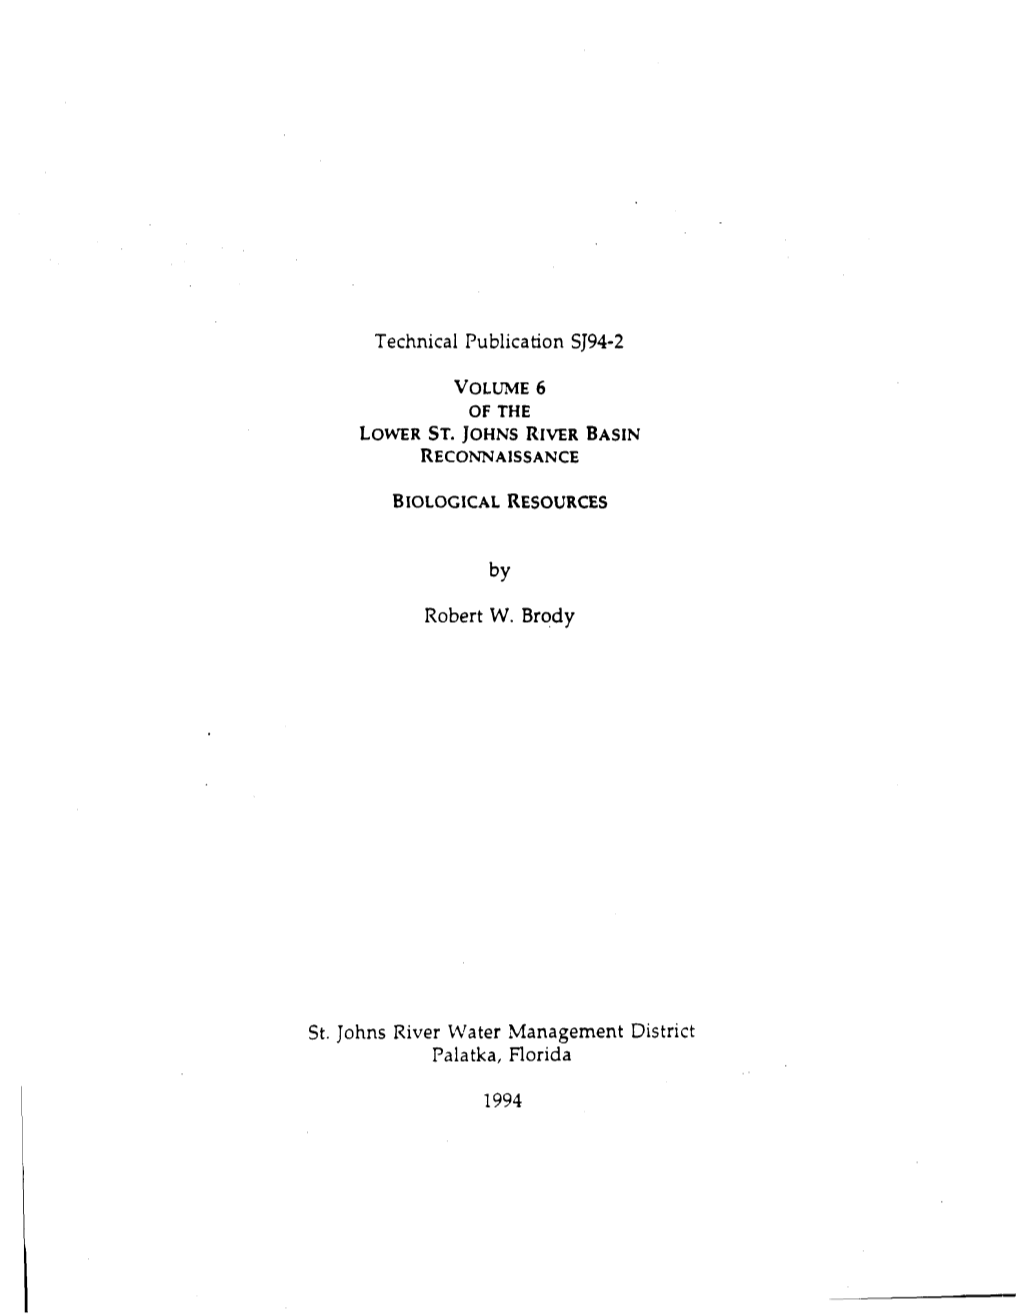 Volume 6 of the Lower St. Johns River Basin Reconnaissance Biological Resources